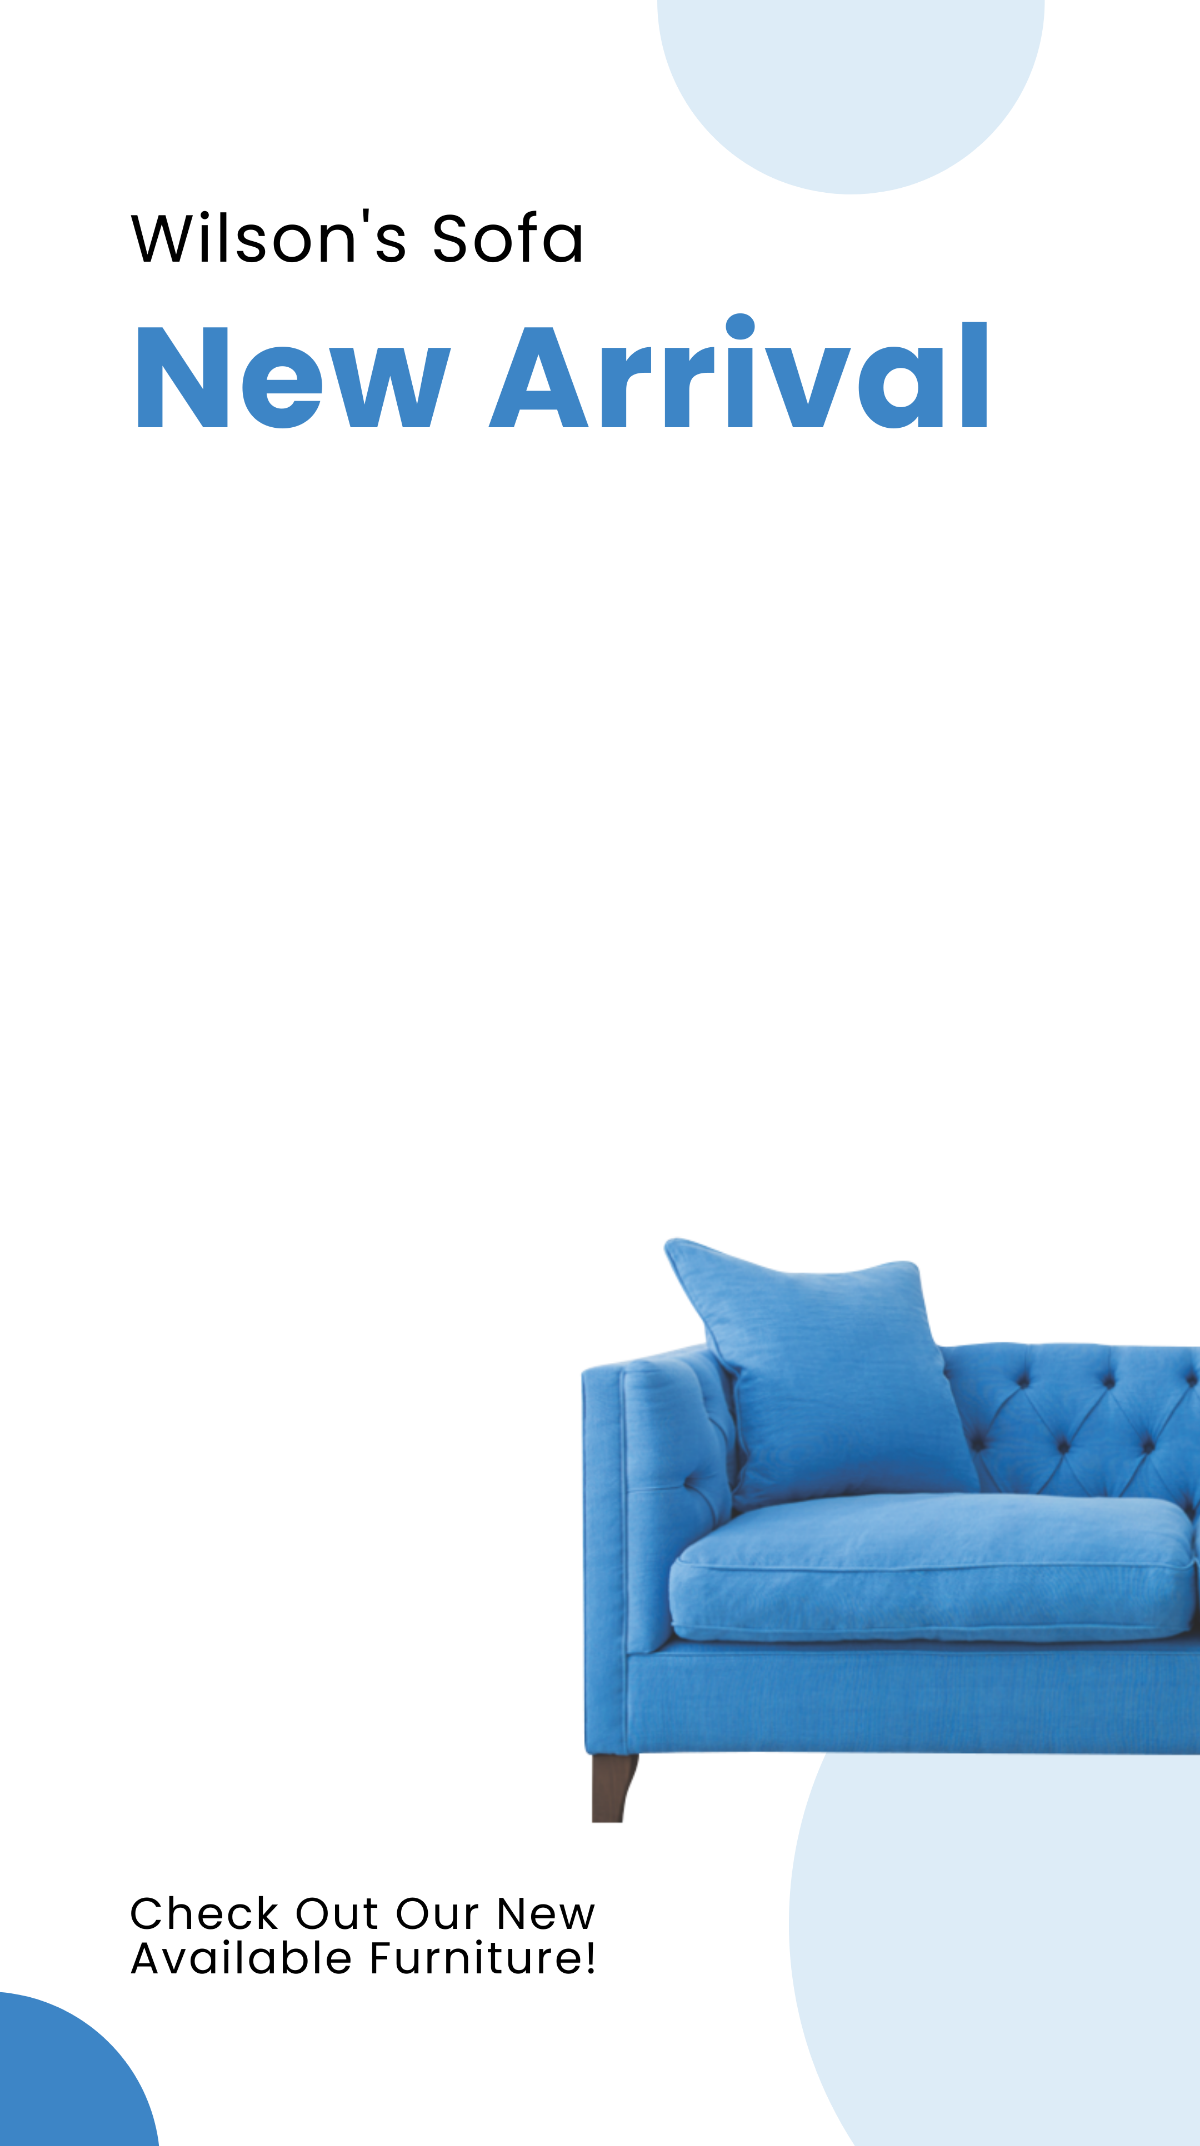 New Furniture Arrival Snapchat Geofilter Template